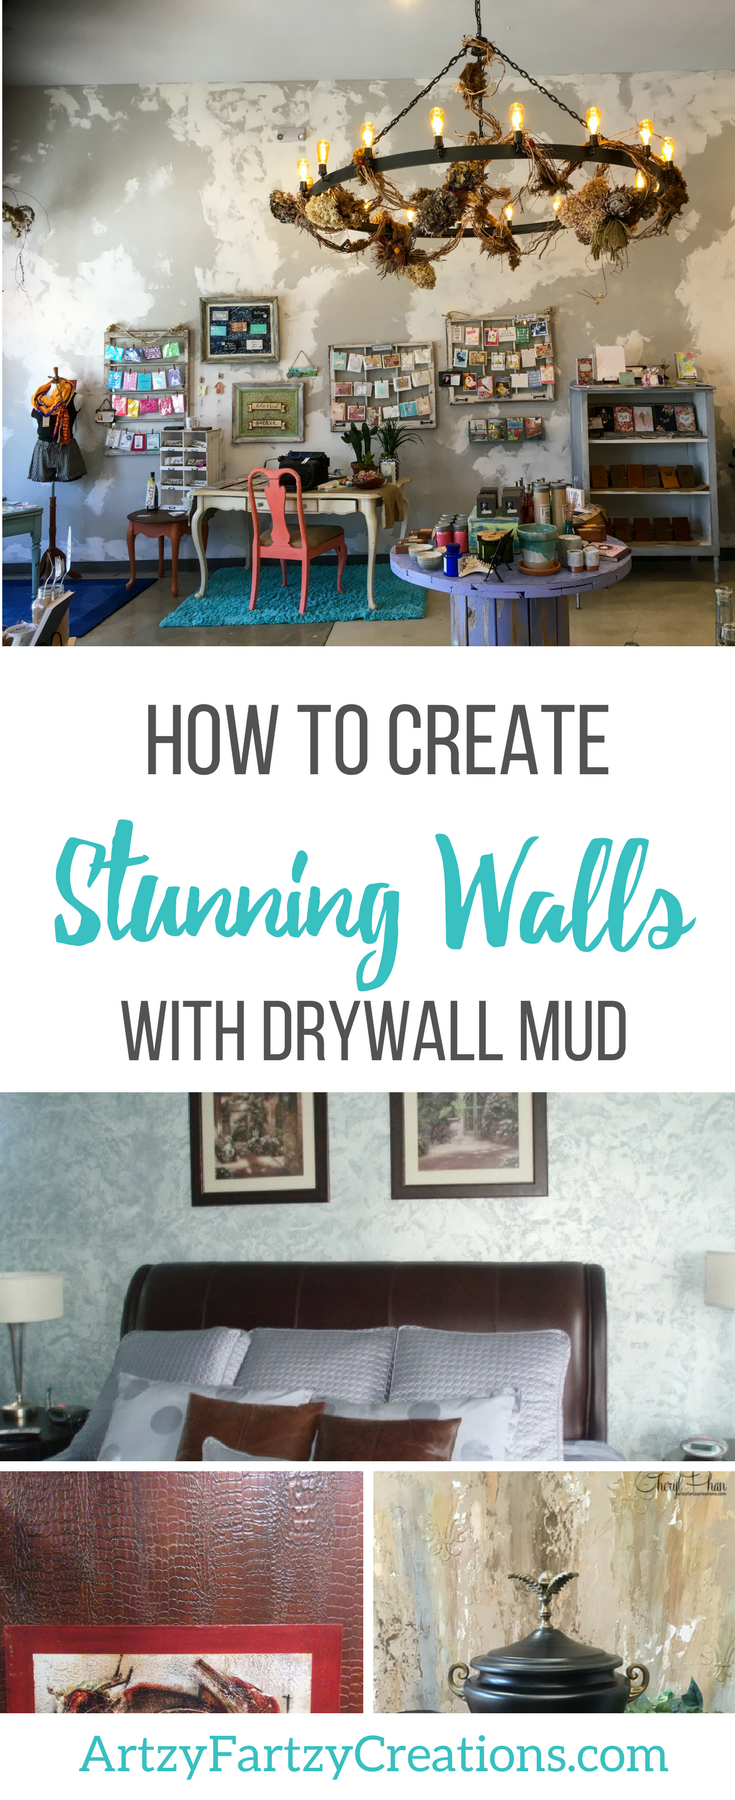 How to Create Stunning Walls with DryWall Mud by Cheryl Phan | Faux Finish Ideas | Accent Walls | DIY Feature Walls | Faux Finishes for Walls